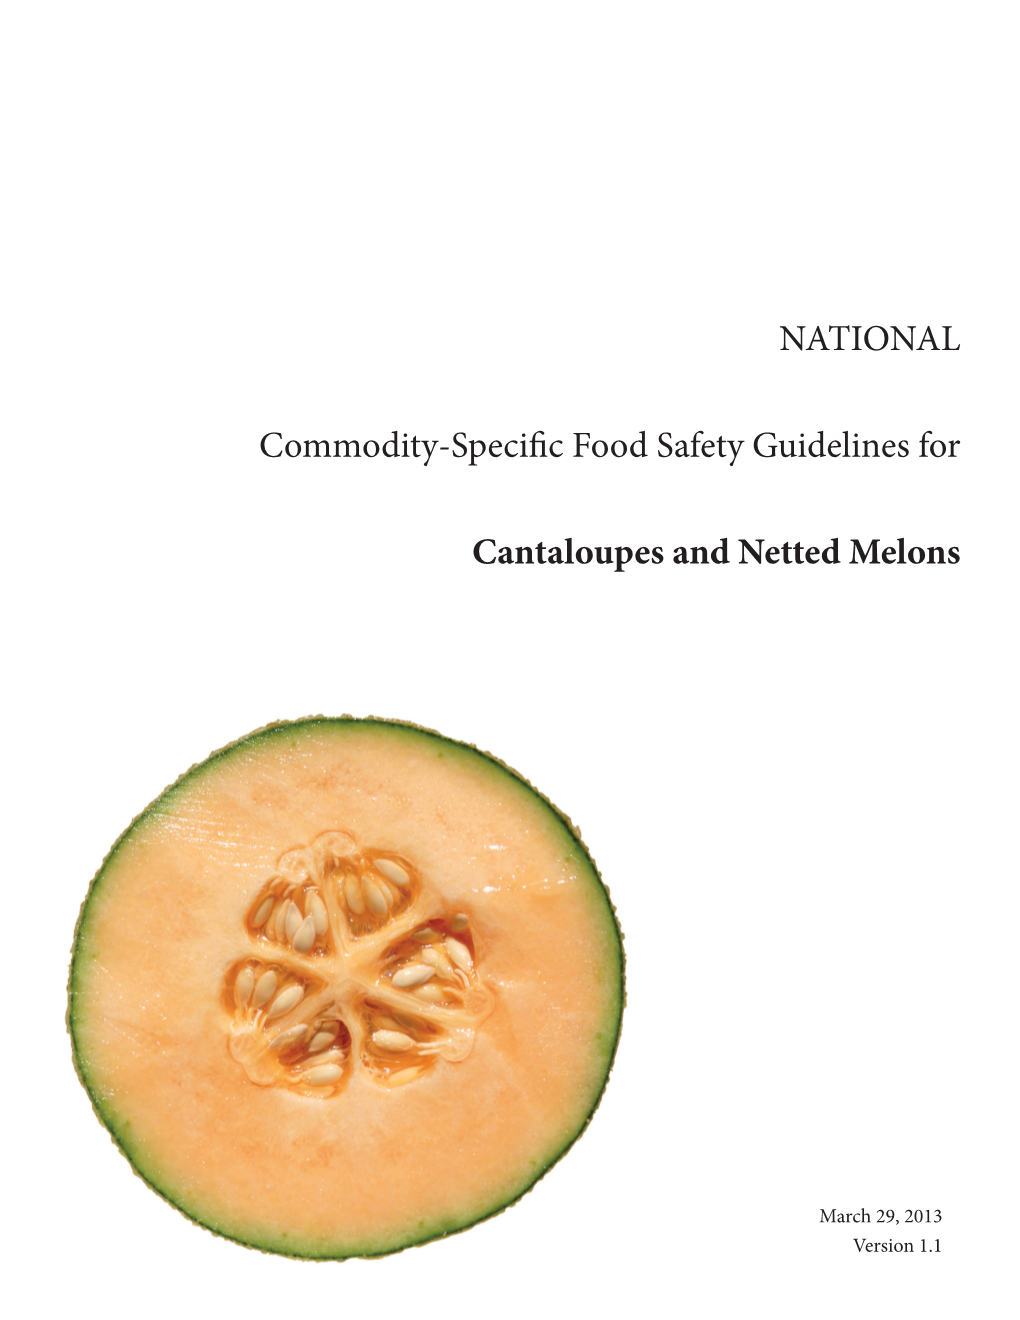 NATIONAL Commodity-Specific Food Safety Guidelines for Cantaloupes